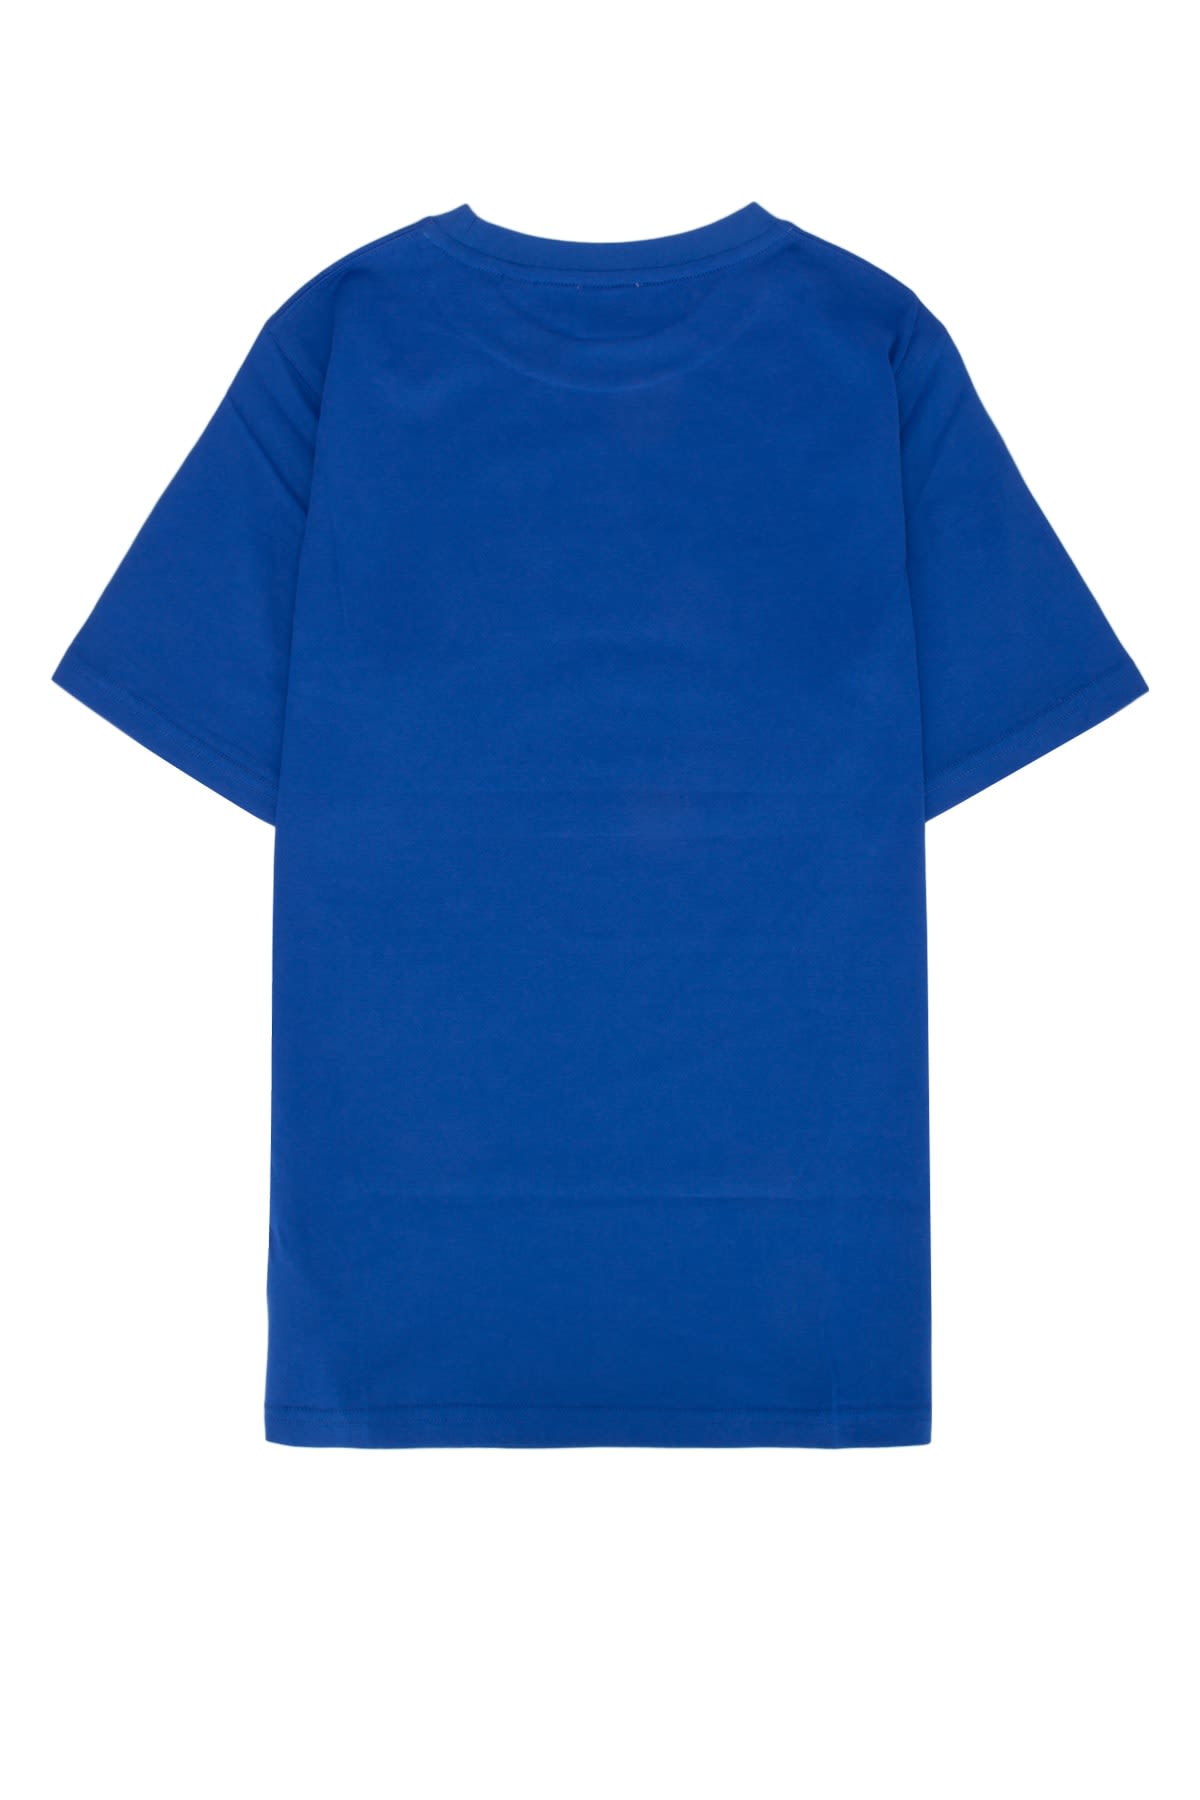 Burberry Kids' T-shirt In Canvasblue